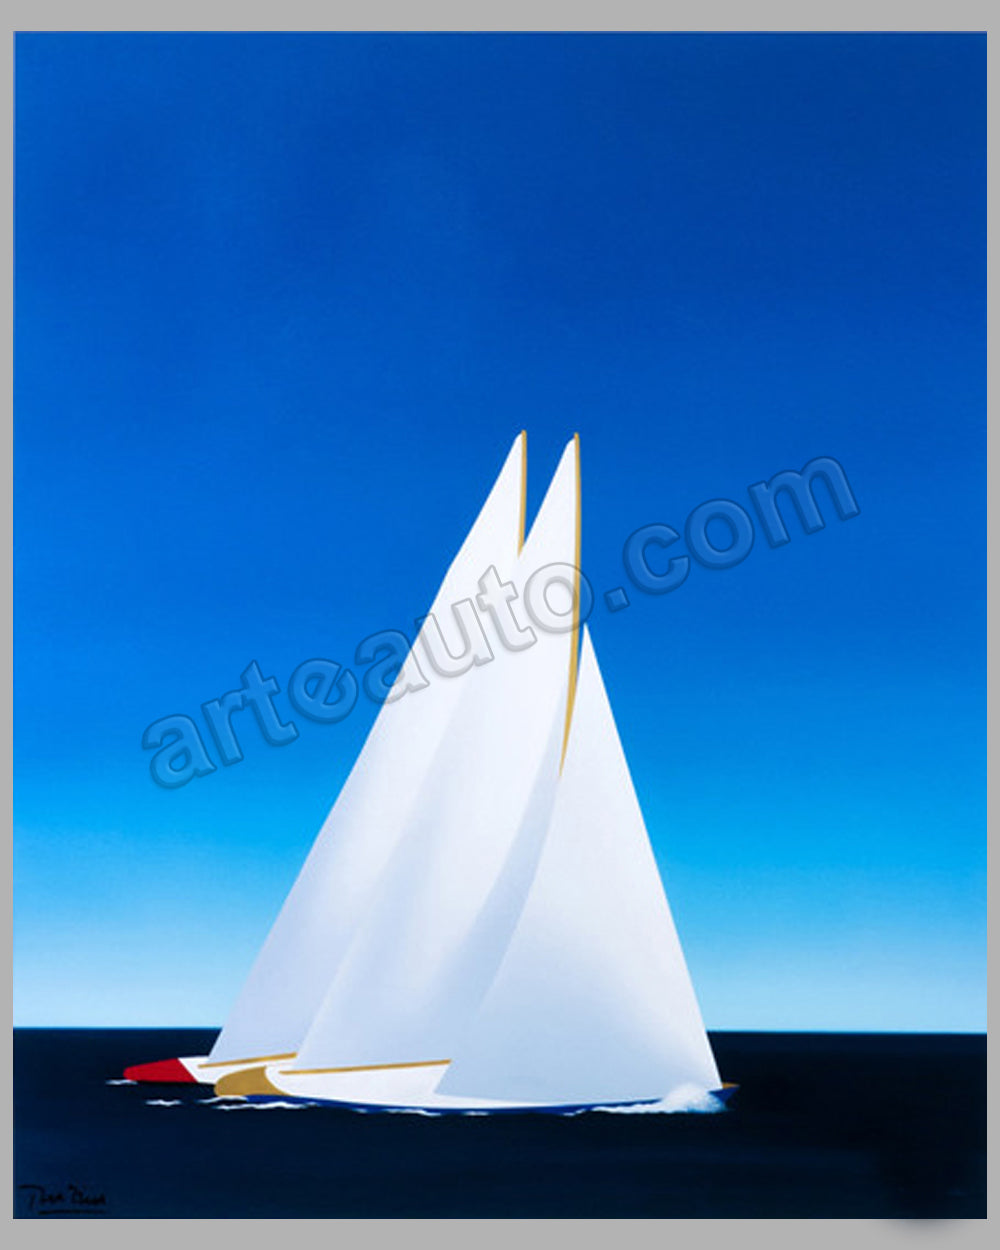 Louis Vuitton Cup- Trophy Poster – Annapolis Marine Art Gallery